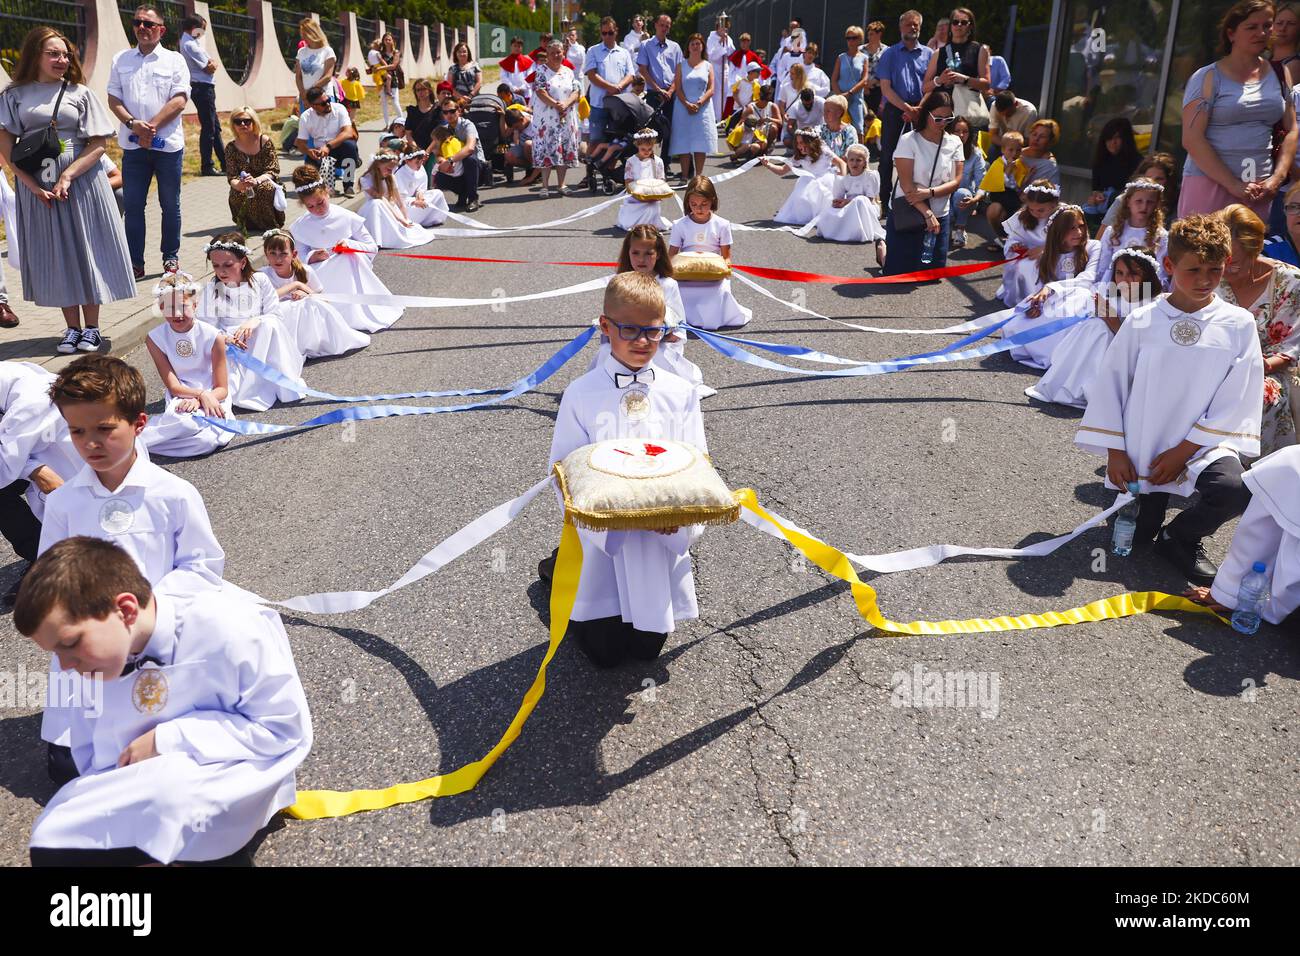 Children attend Corpus Christi procession in Andrychow, Poland on June 16, 2022. The procession starts with a priest carrying a monstrance under a canopy. The faithful follow him singing religious hymns, while young girls dressed in white or traditional regional dresses scatter flower petals along the route. Corpus Christi is a Catholic moveable feast commemorating the Transubstitution. (Photo by Beata Zawrzel/NurPhoto) Stock Photo